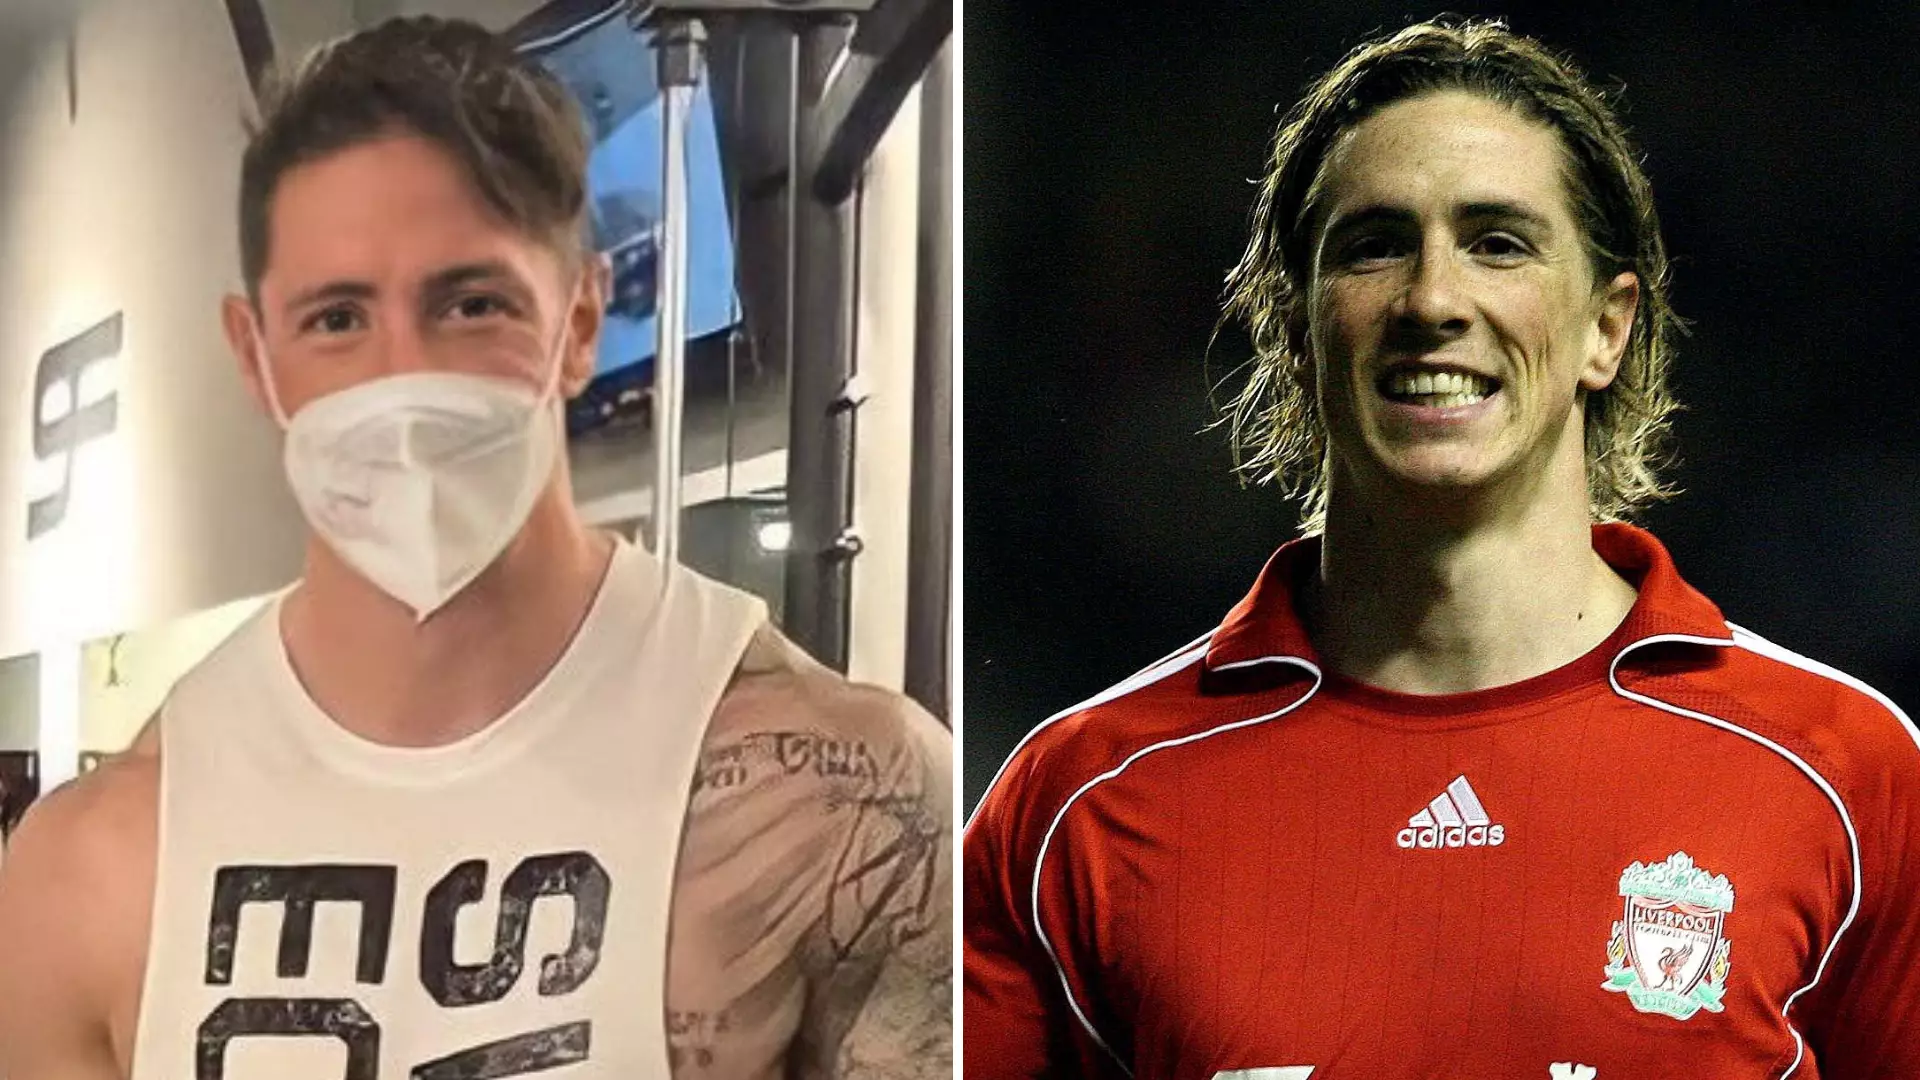 Liverpool Legend Fernando Torres’ Remarkable Body Transformation Continues With New Gym Pic